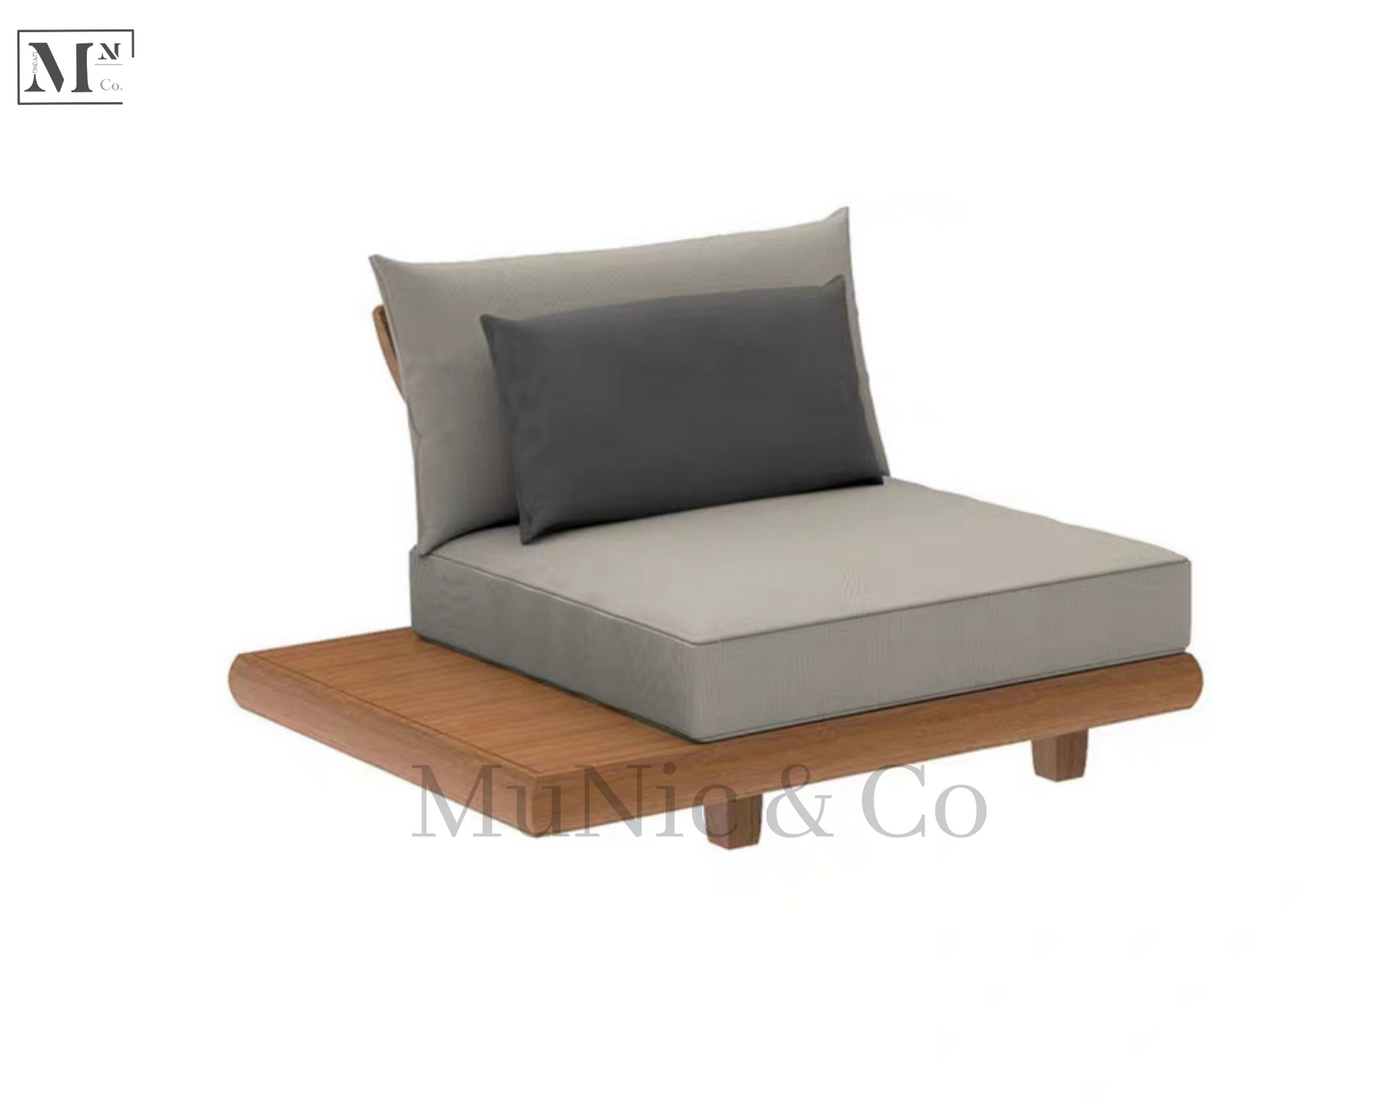 LILYDALE Indoor and Outdoor Wooden Sofa Customisable Sofa